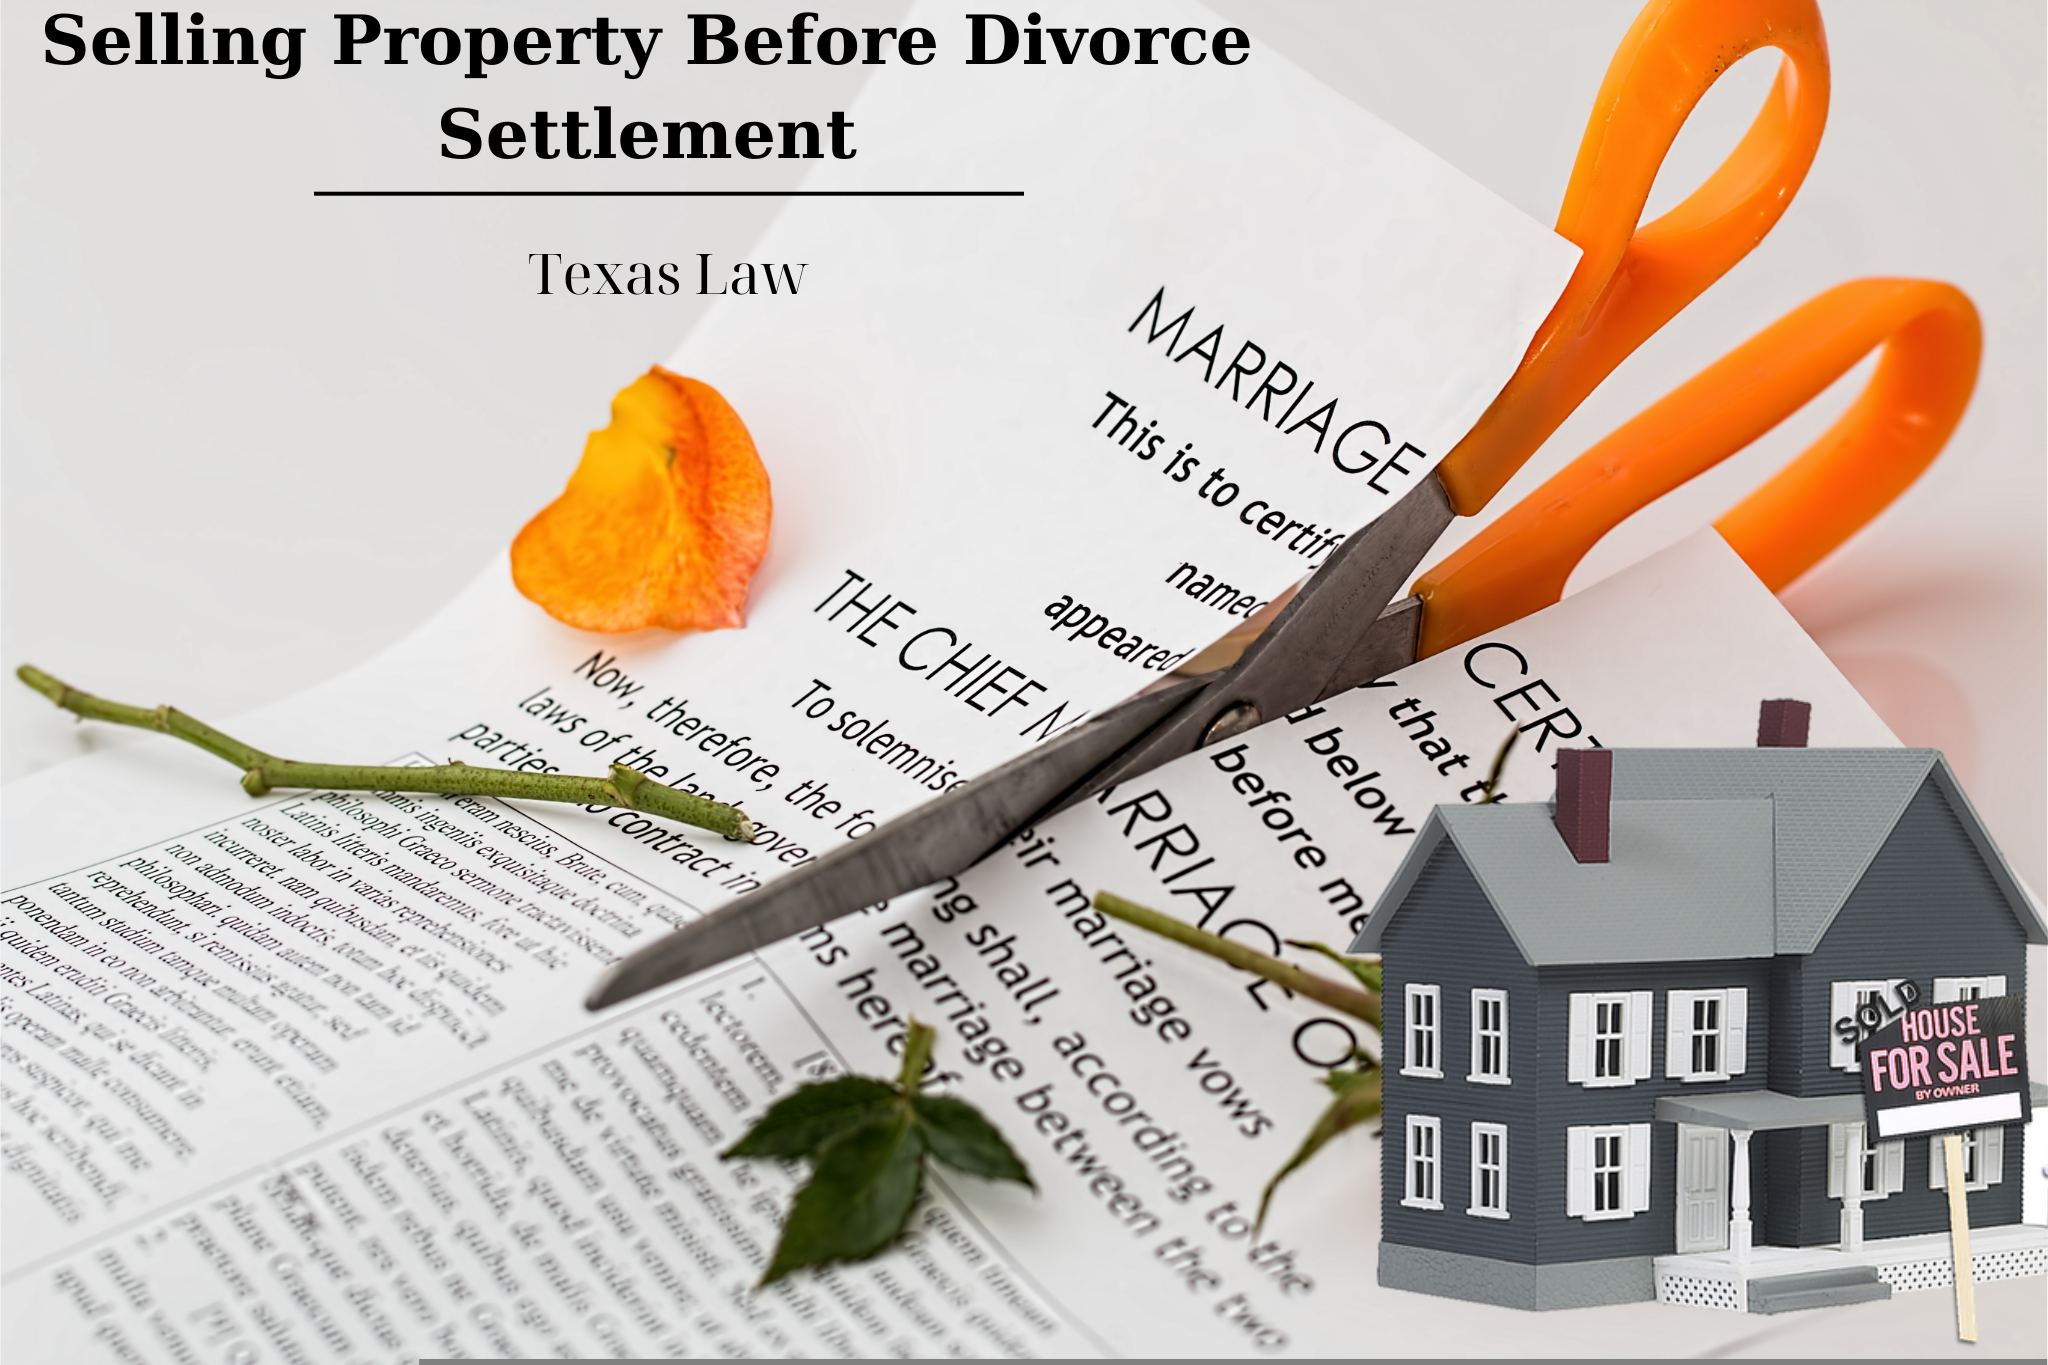 A pair of scissors cutting through a marriage certificate with a document titled "selling property before divorce settlement" in the background, alongside a wilted rose petal and a model house.